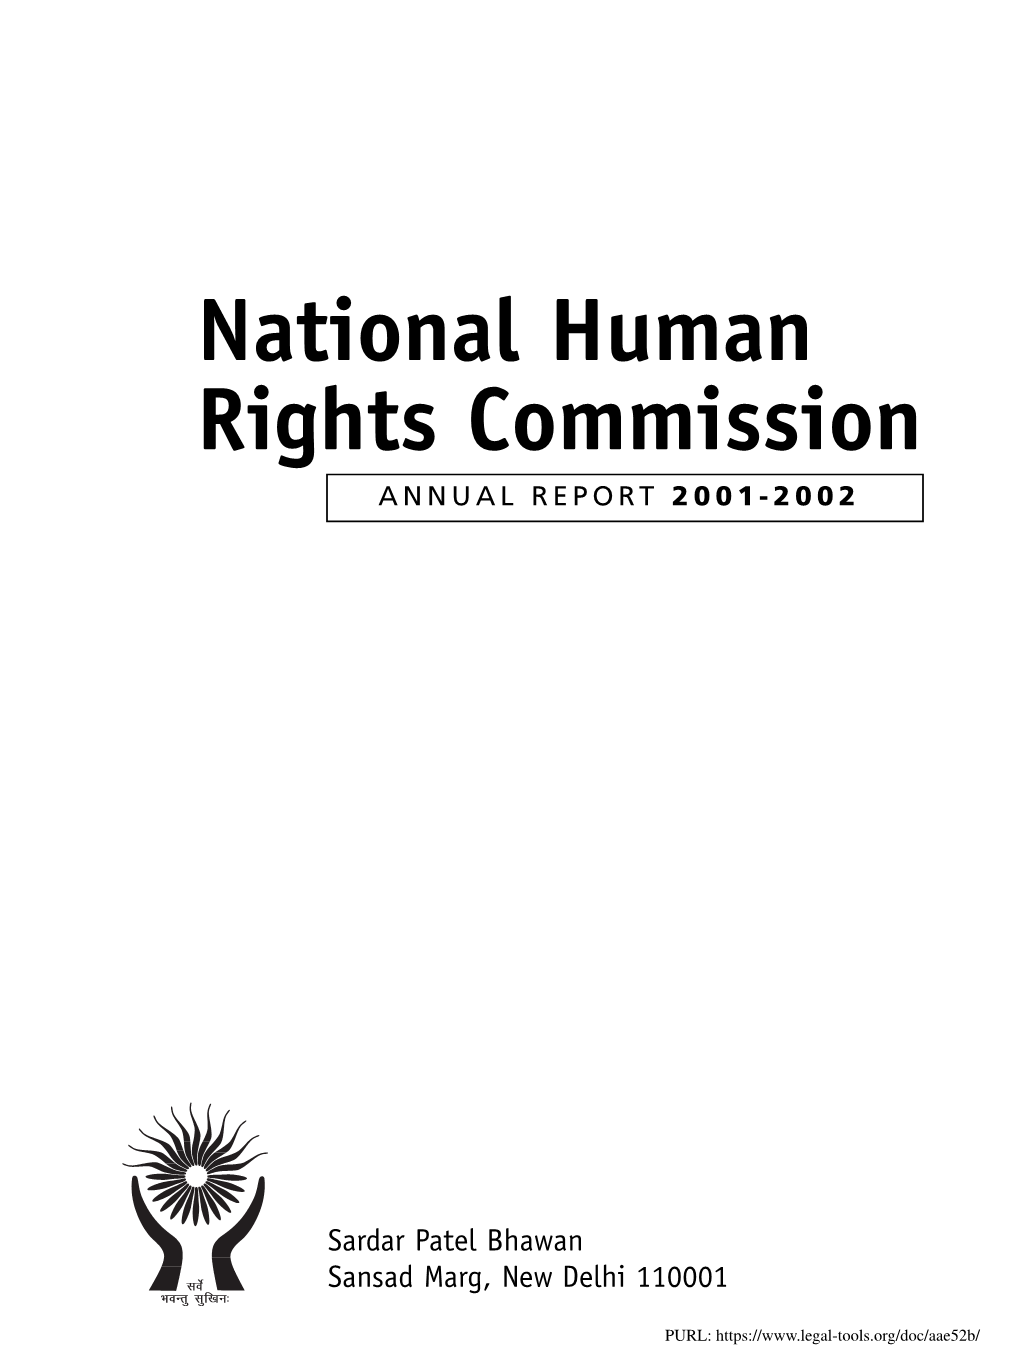 National Human Rights Commission ANNUAL REPORT 2001-2002